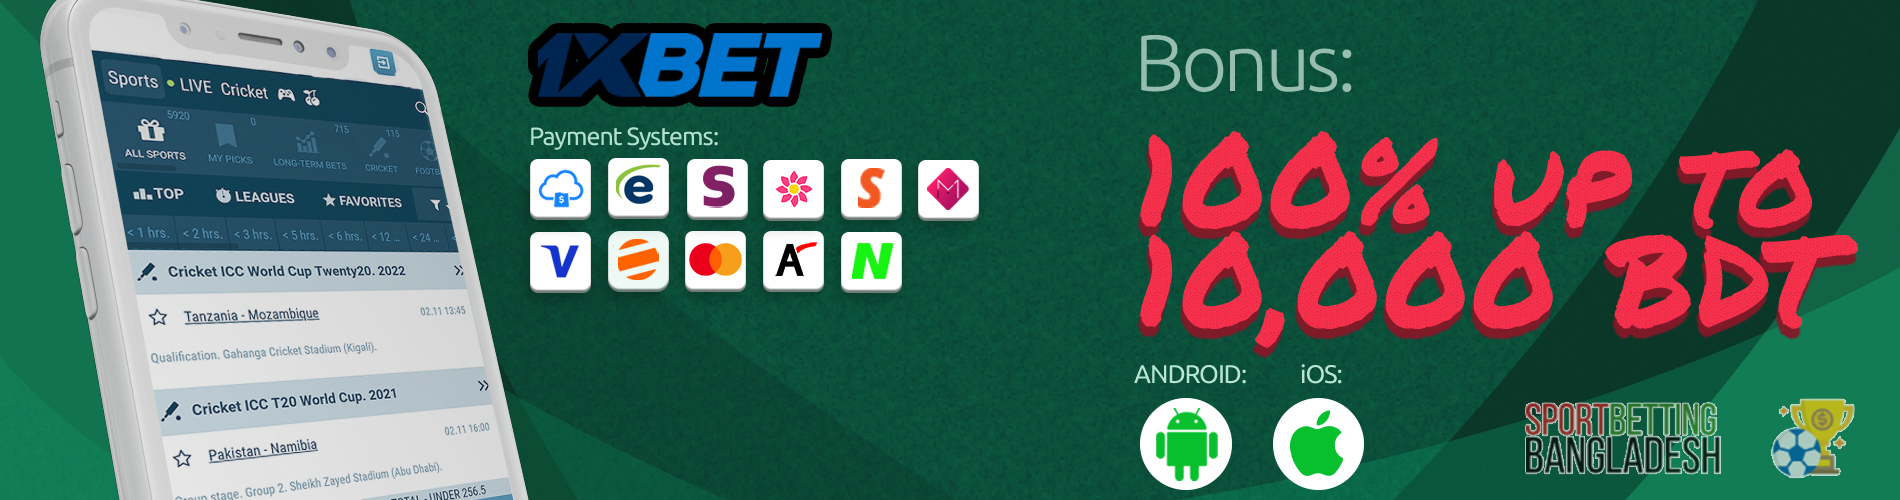 1xBet Bangladesh app: payment systems, available platforms, welcome bonus.